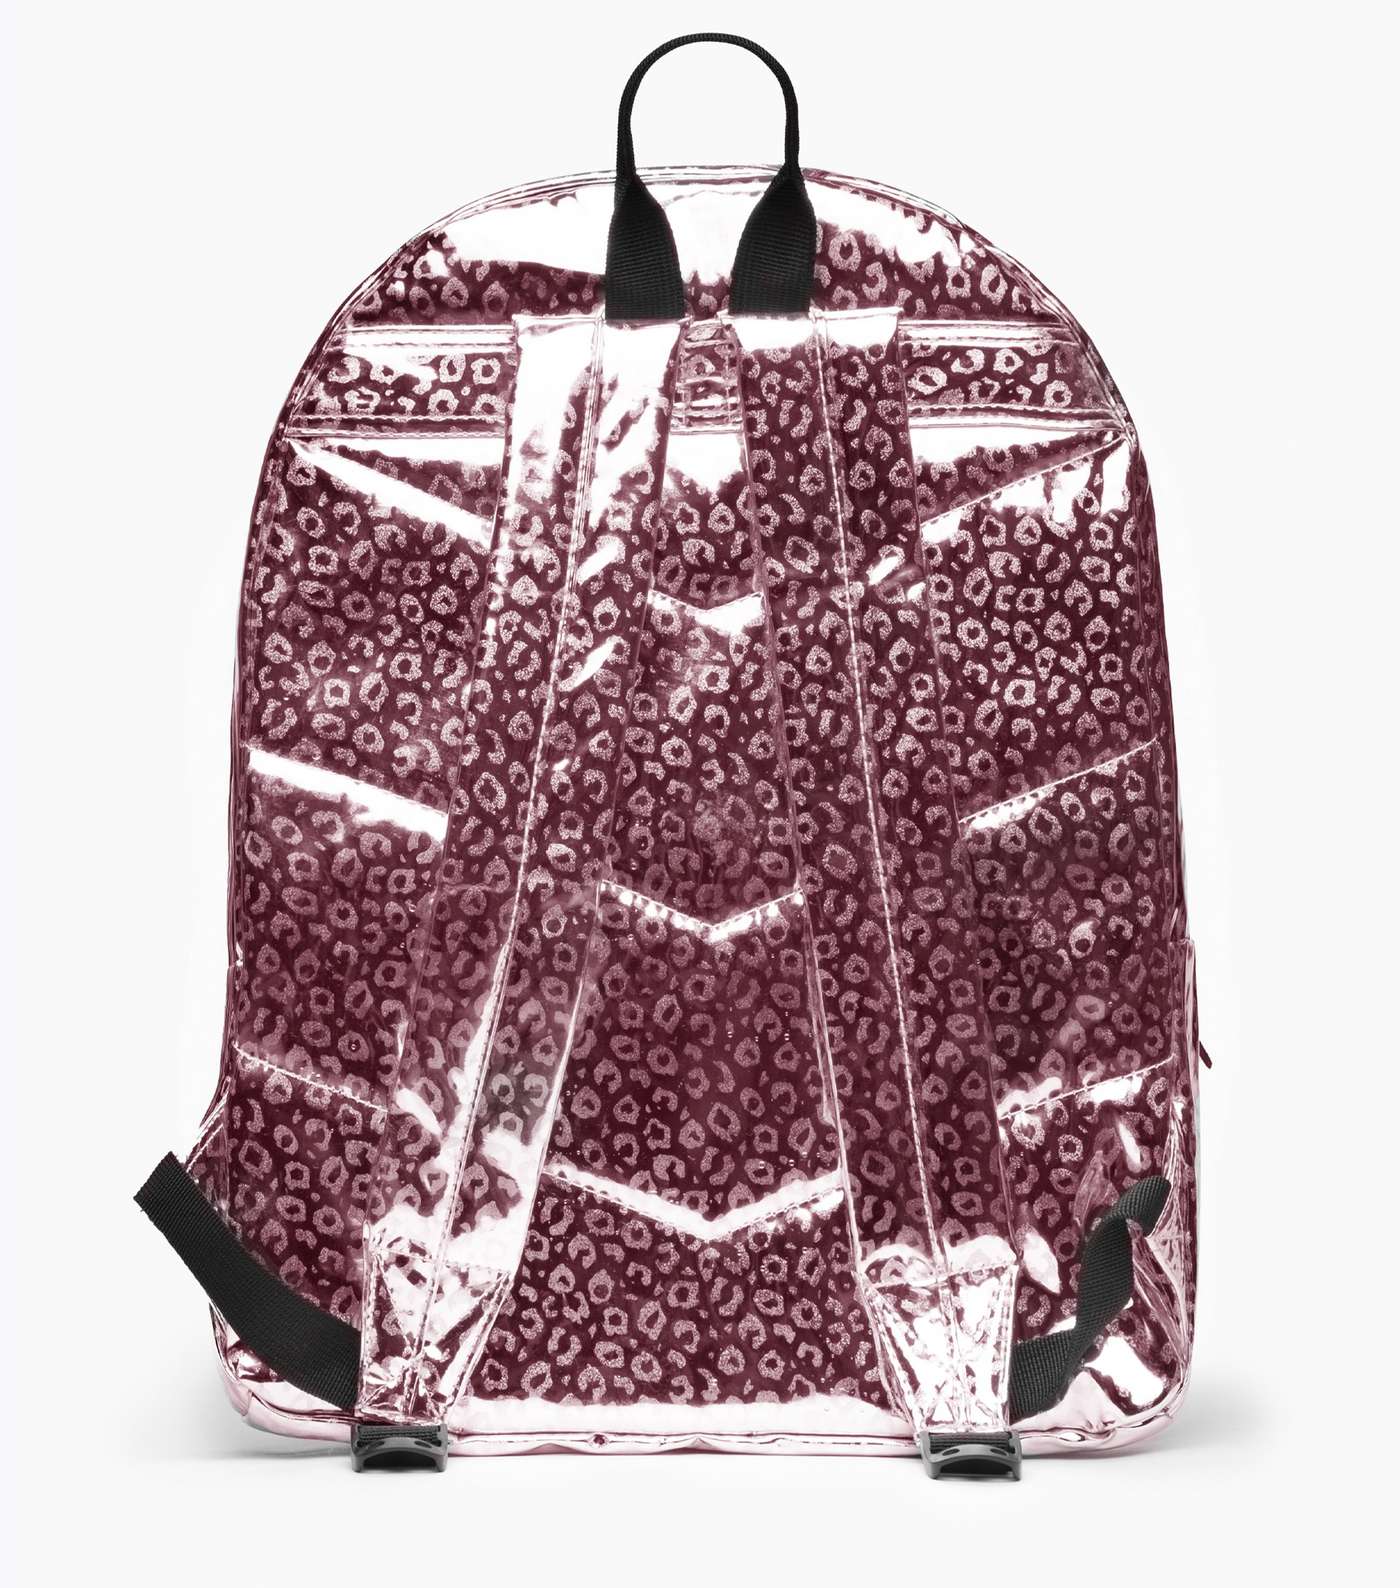 HYPE KIDS Pink Leopard Print Holographic Backpack Image 2